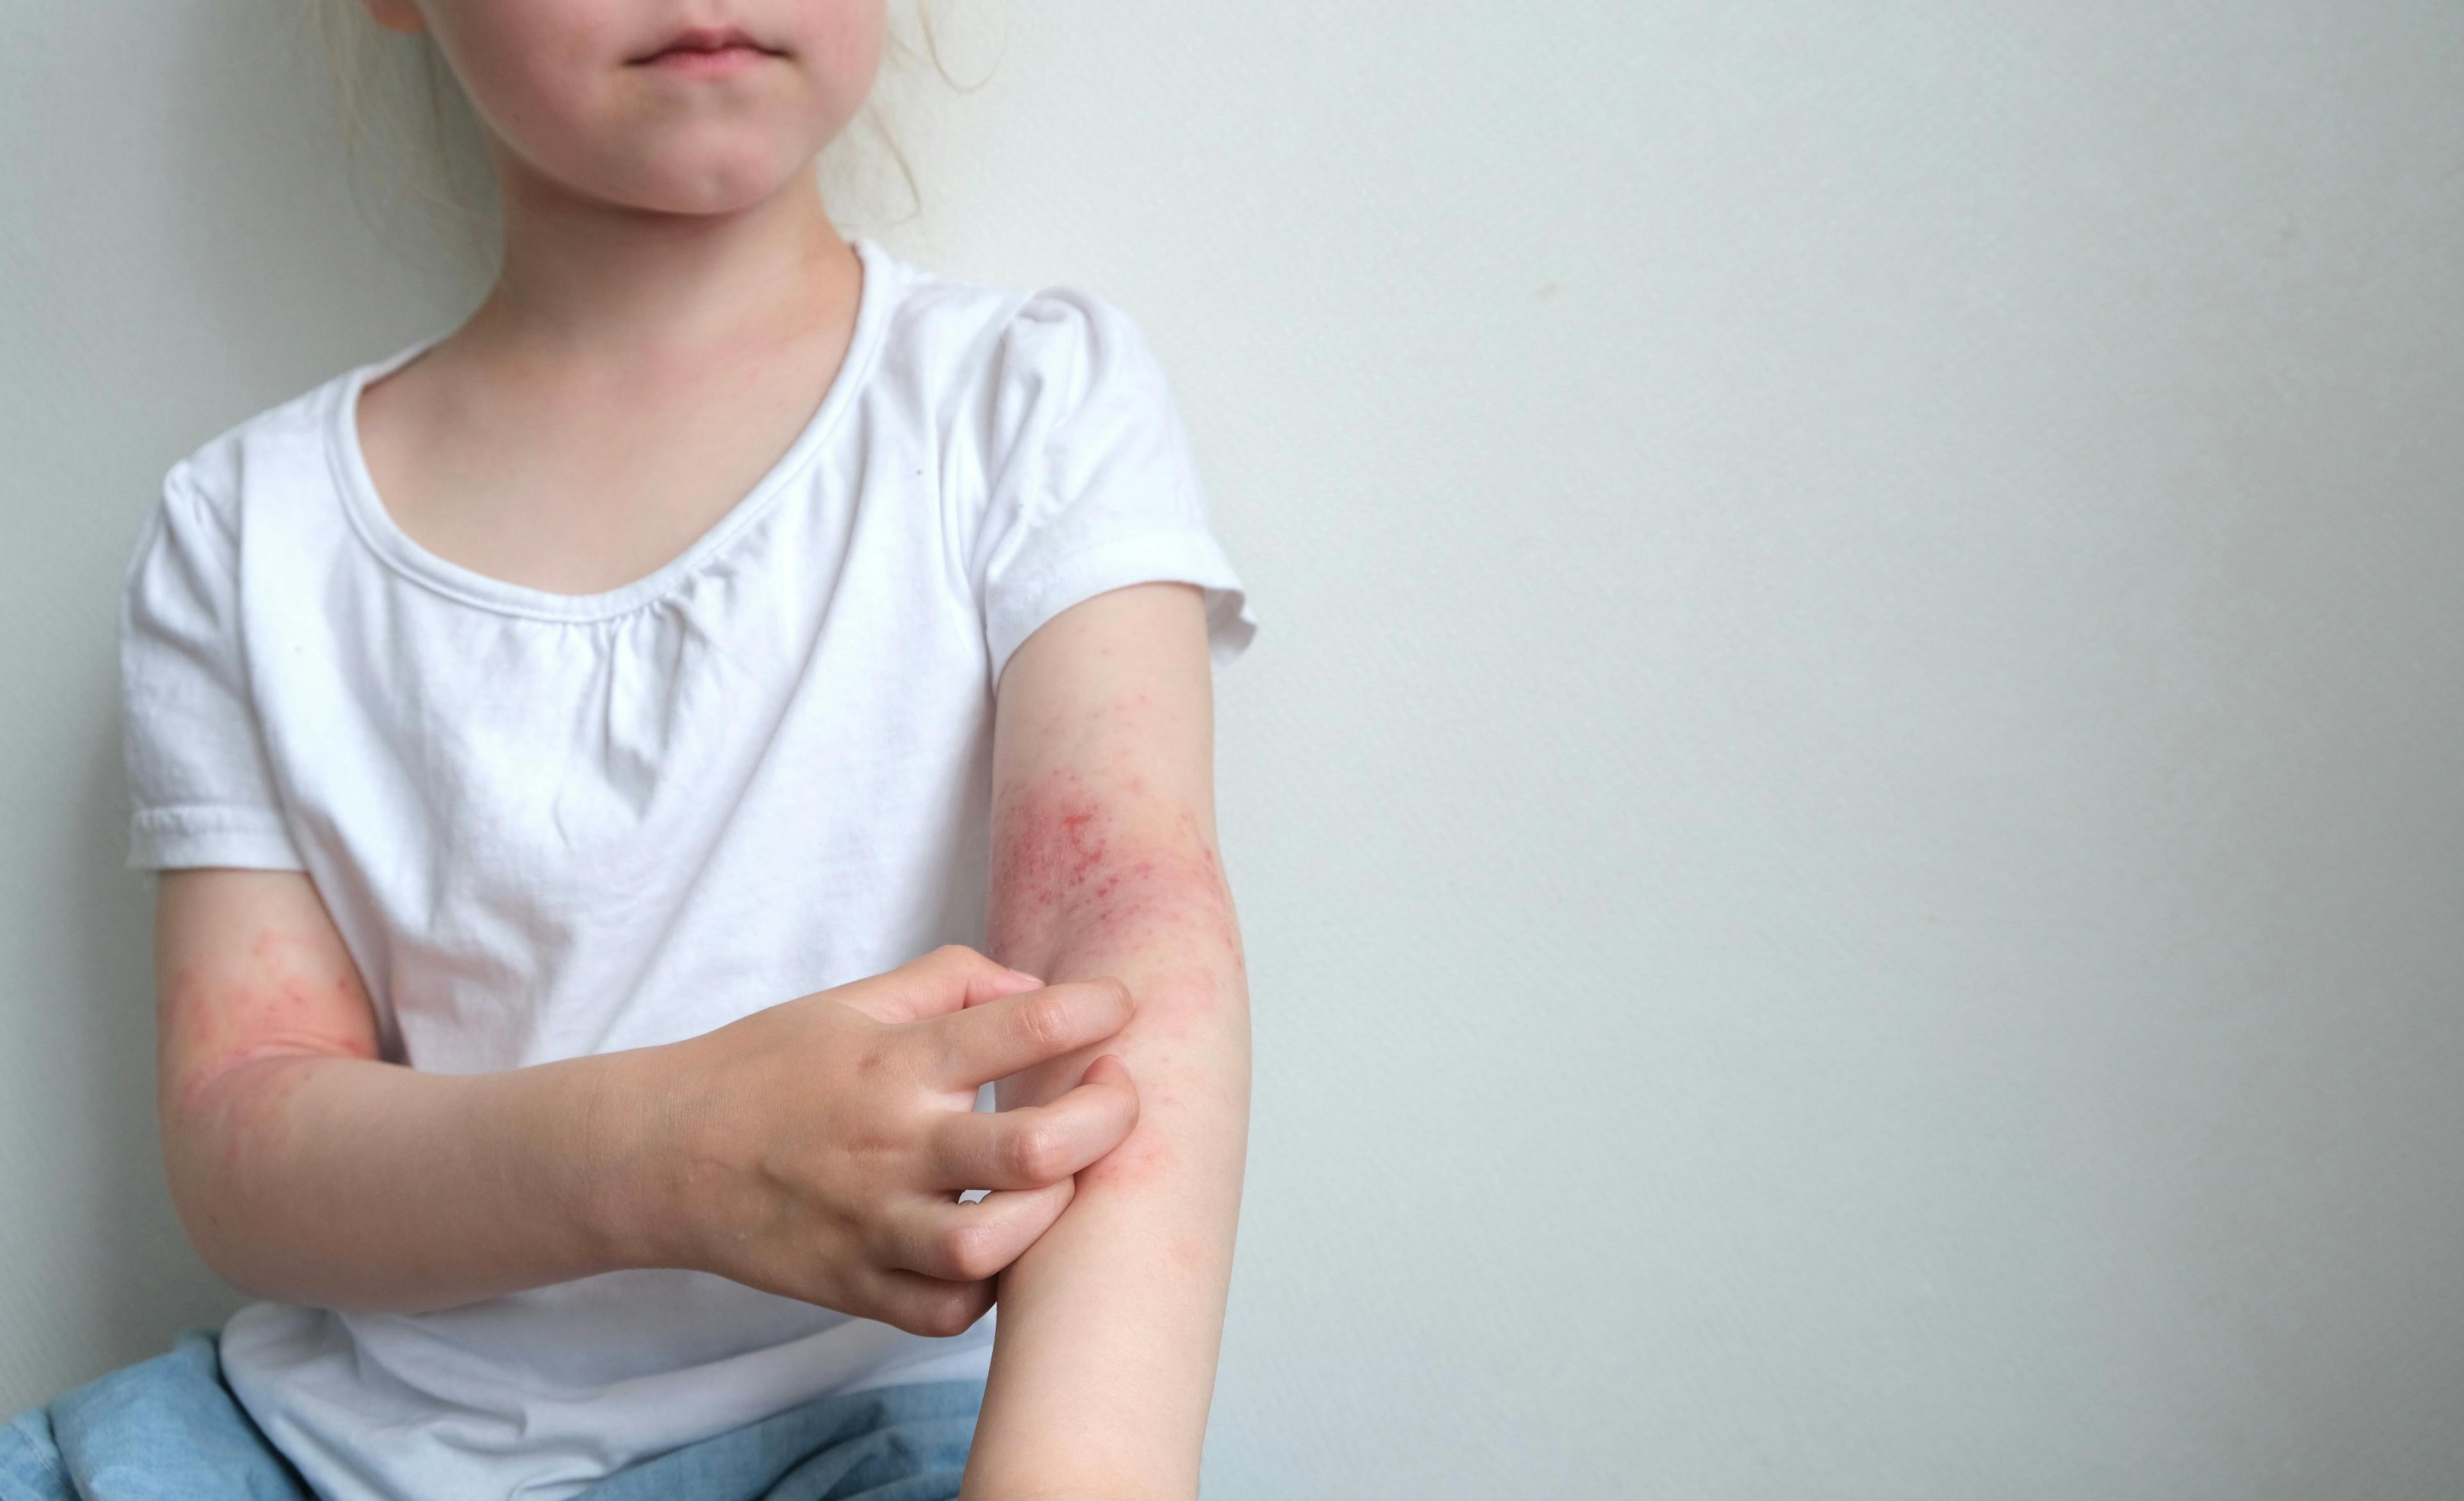 Roflumilast cream safe, effective for atopic dermatitis in children 6 years and up